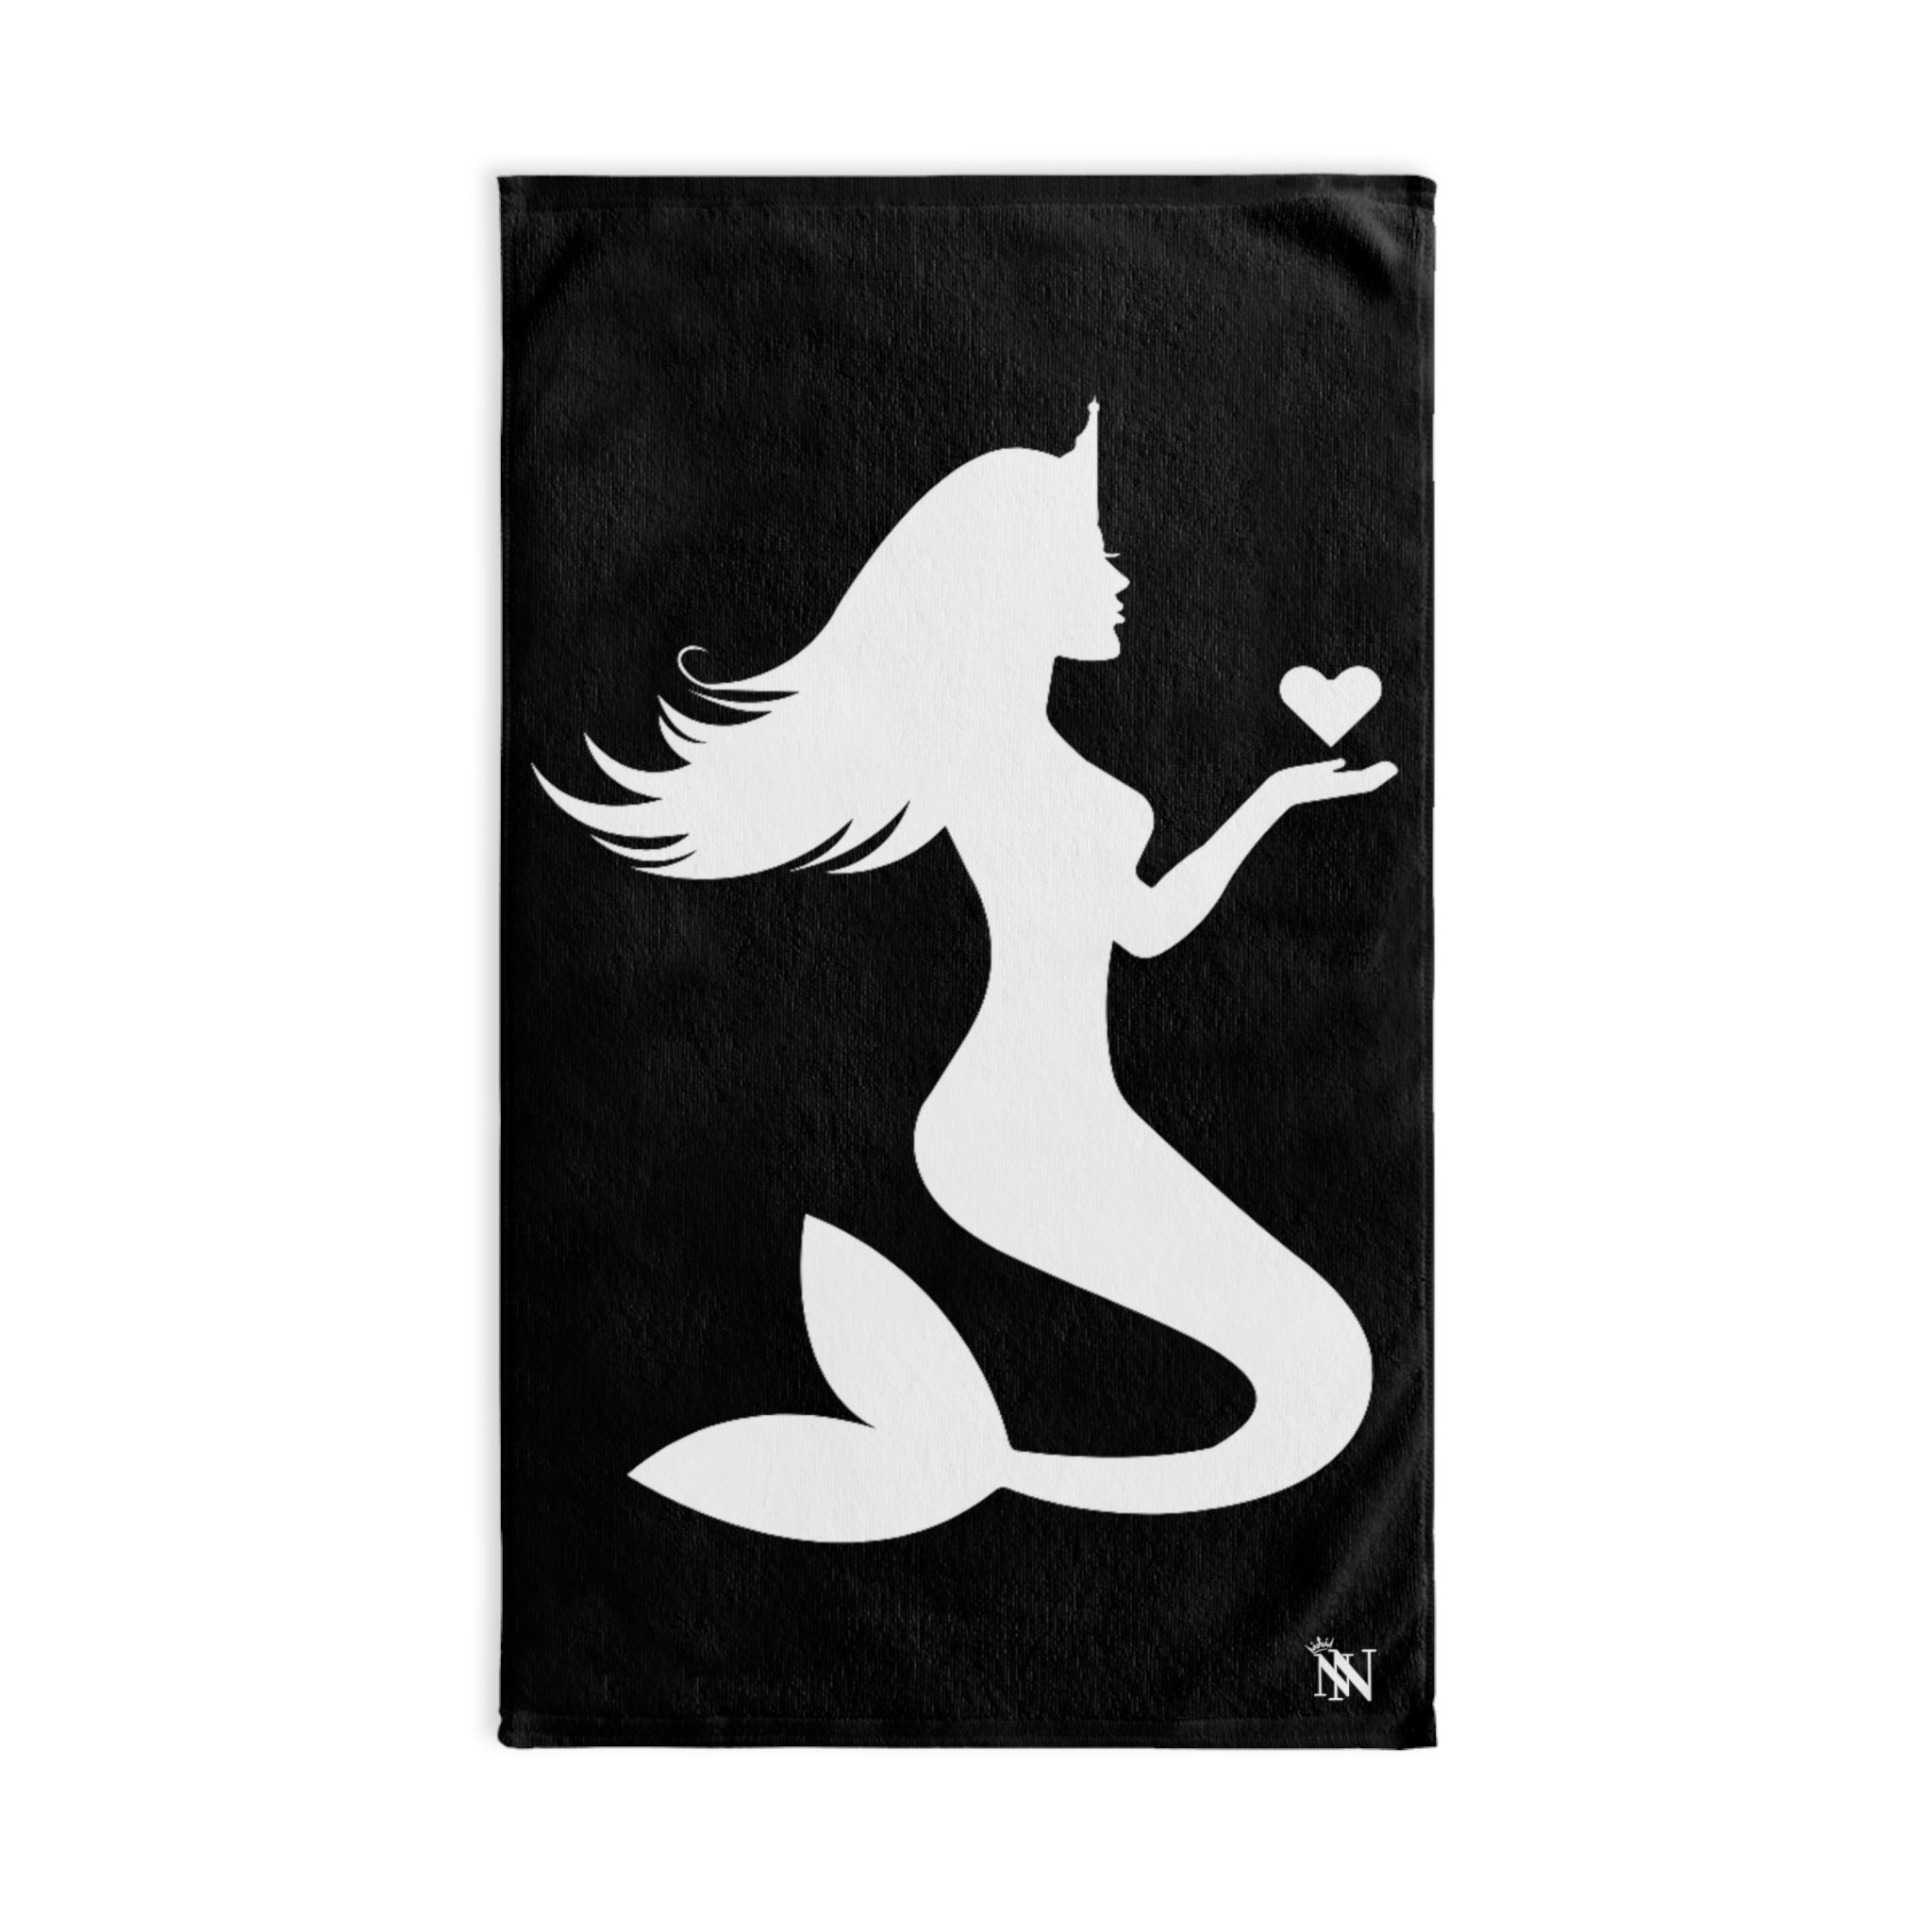 Pray Mermaid Heart Black | Sexy Gifts for Boyfriend, Funny Towel Romantic Gift for Wedding Couple Fiance First Year 2nd Anniversary Valentines, Party Gag Gifts, Joke Humor Cloth for Husband Men BF NECTAR NAPKINS